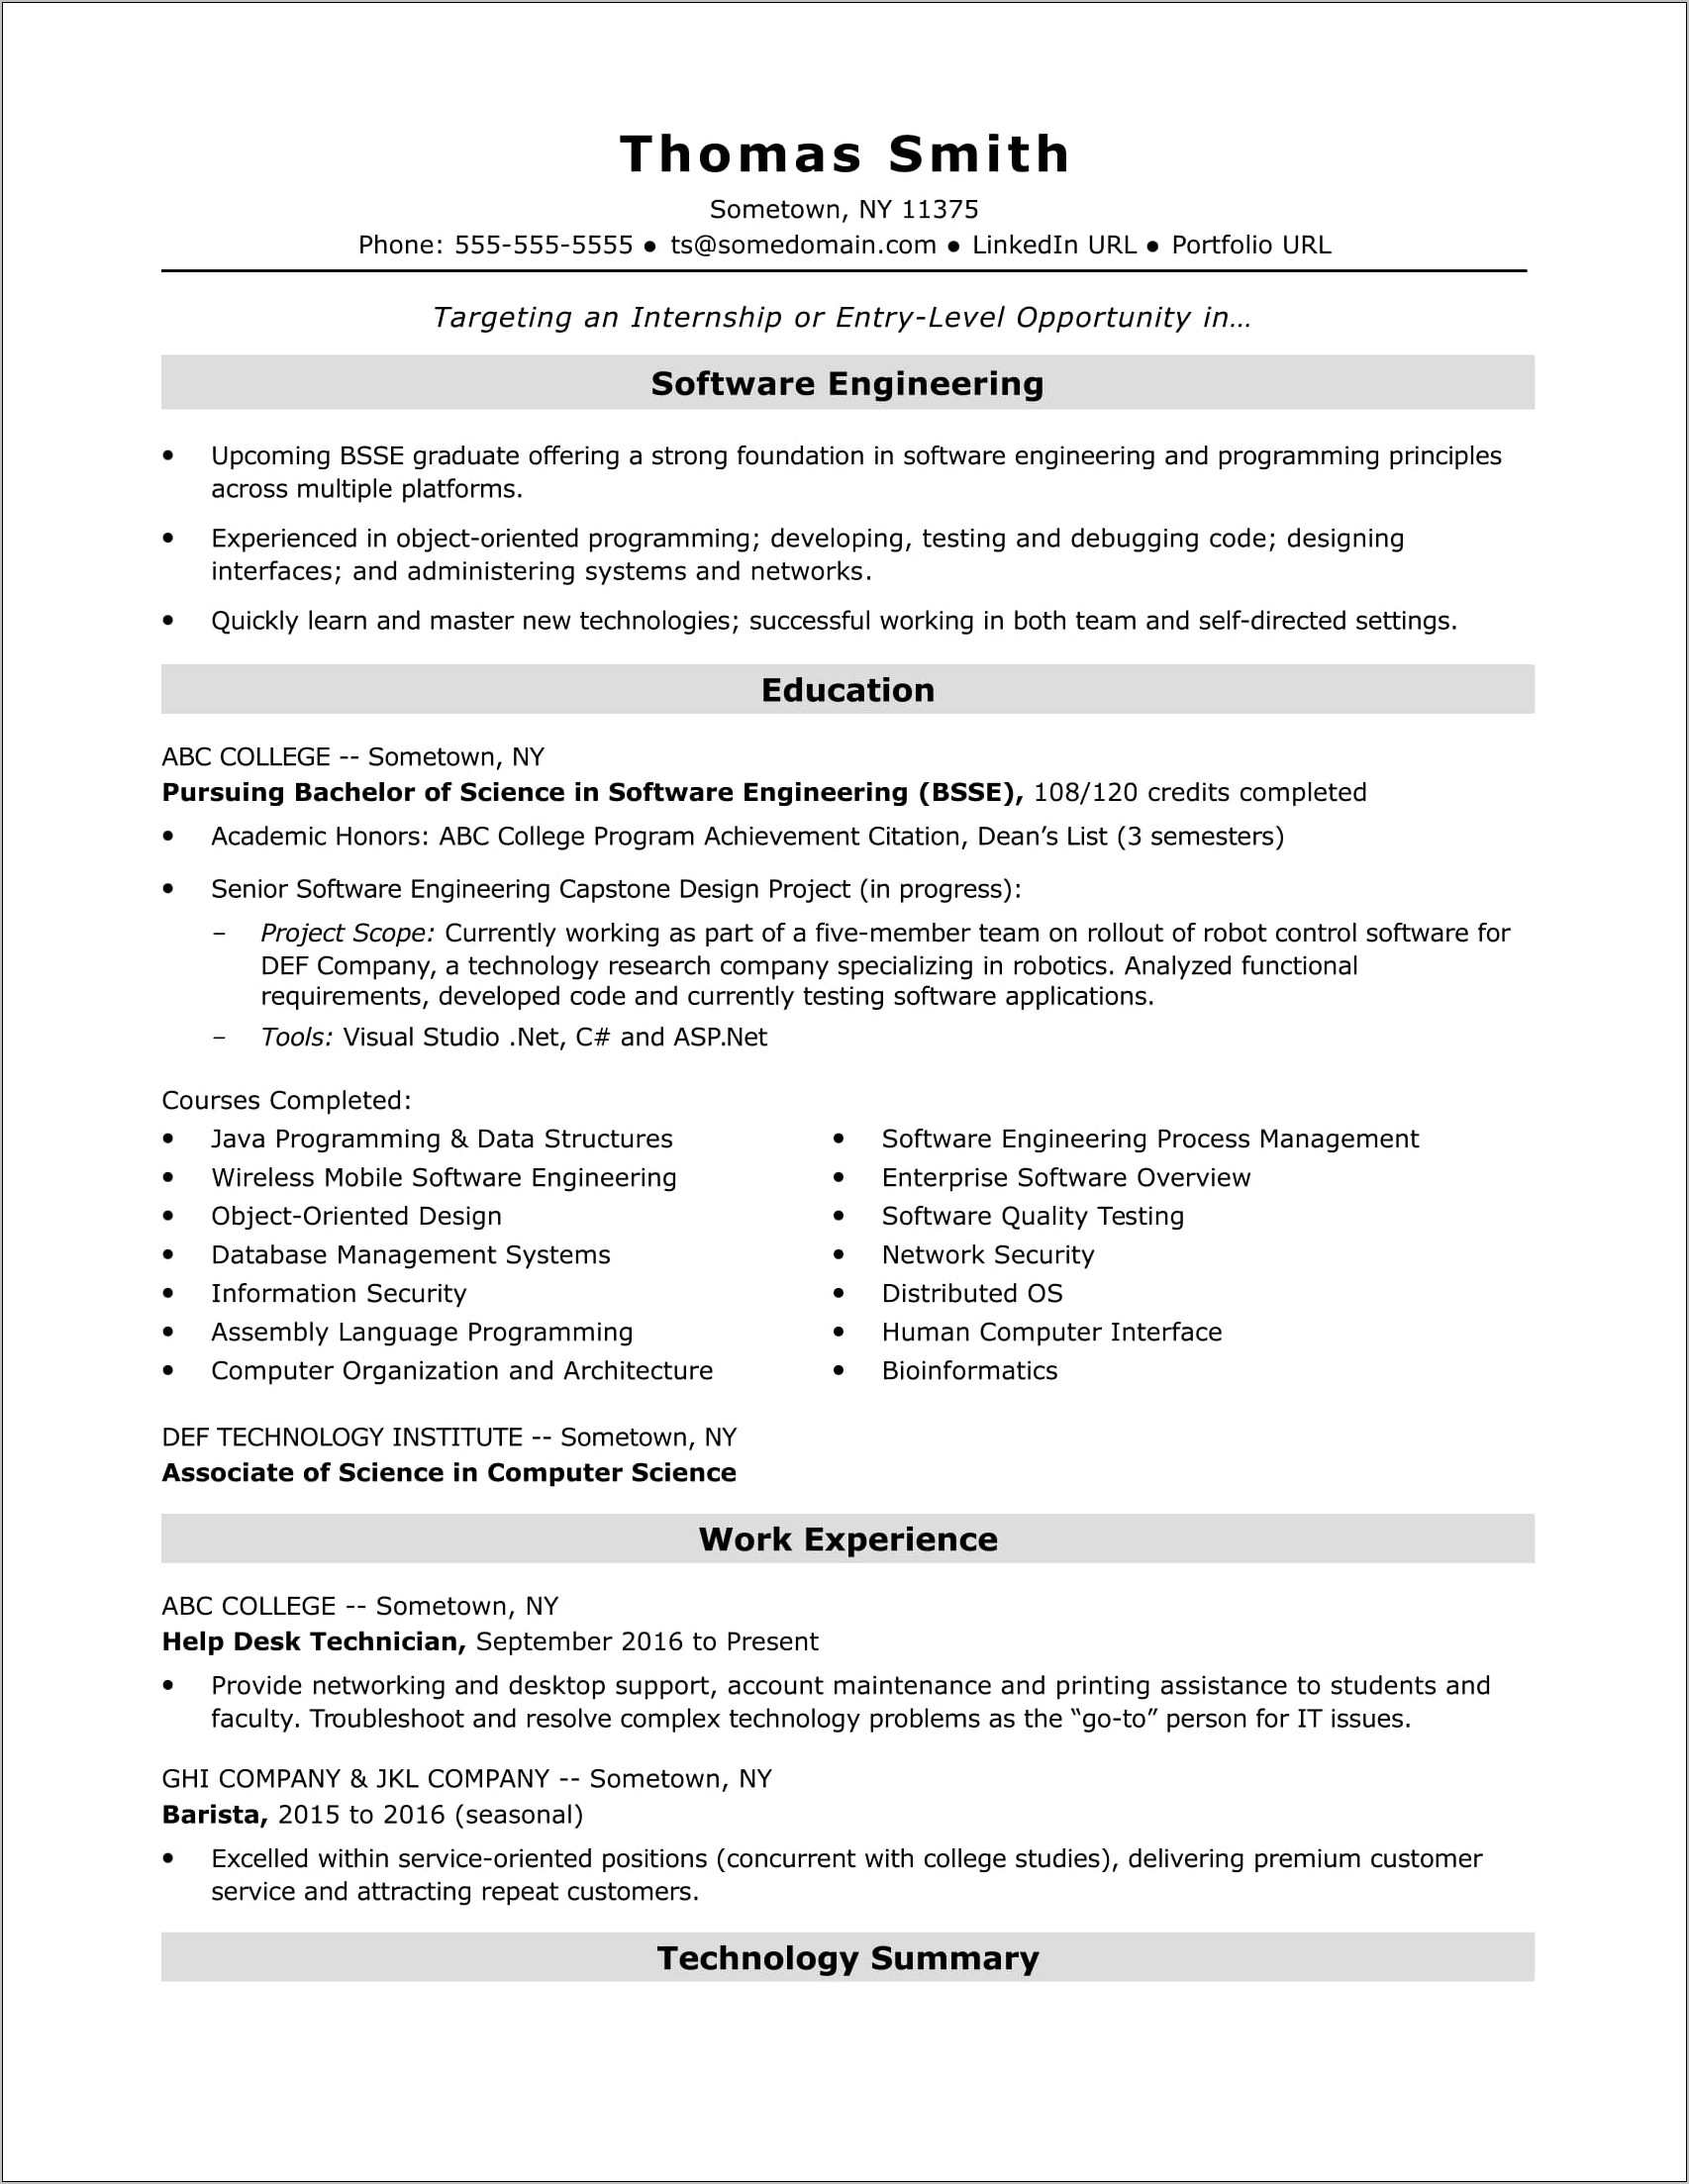 Resume Summary Examples For Human Services